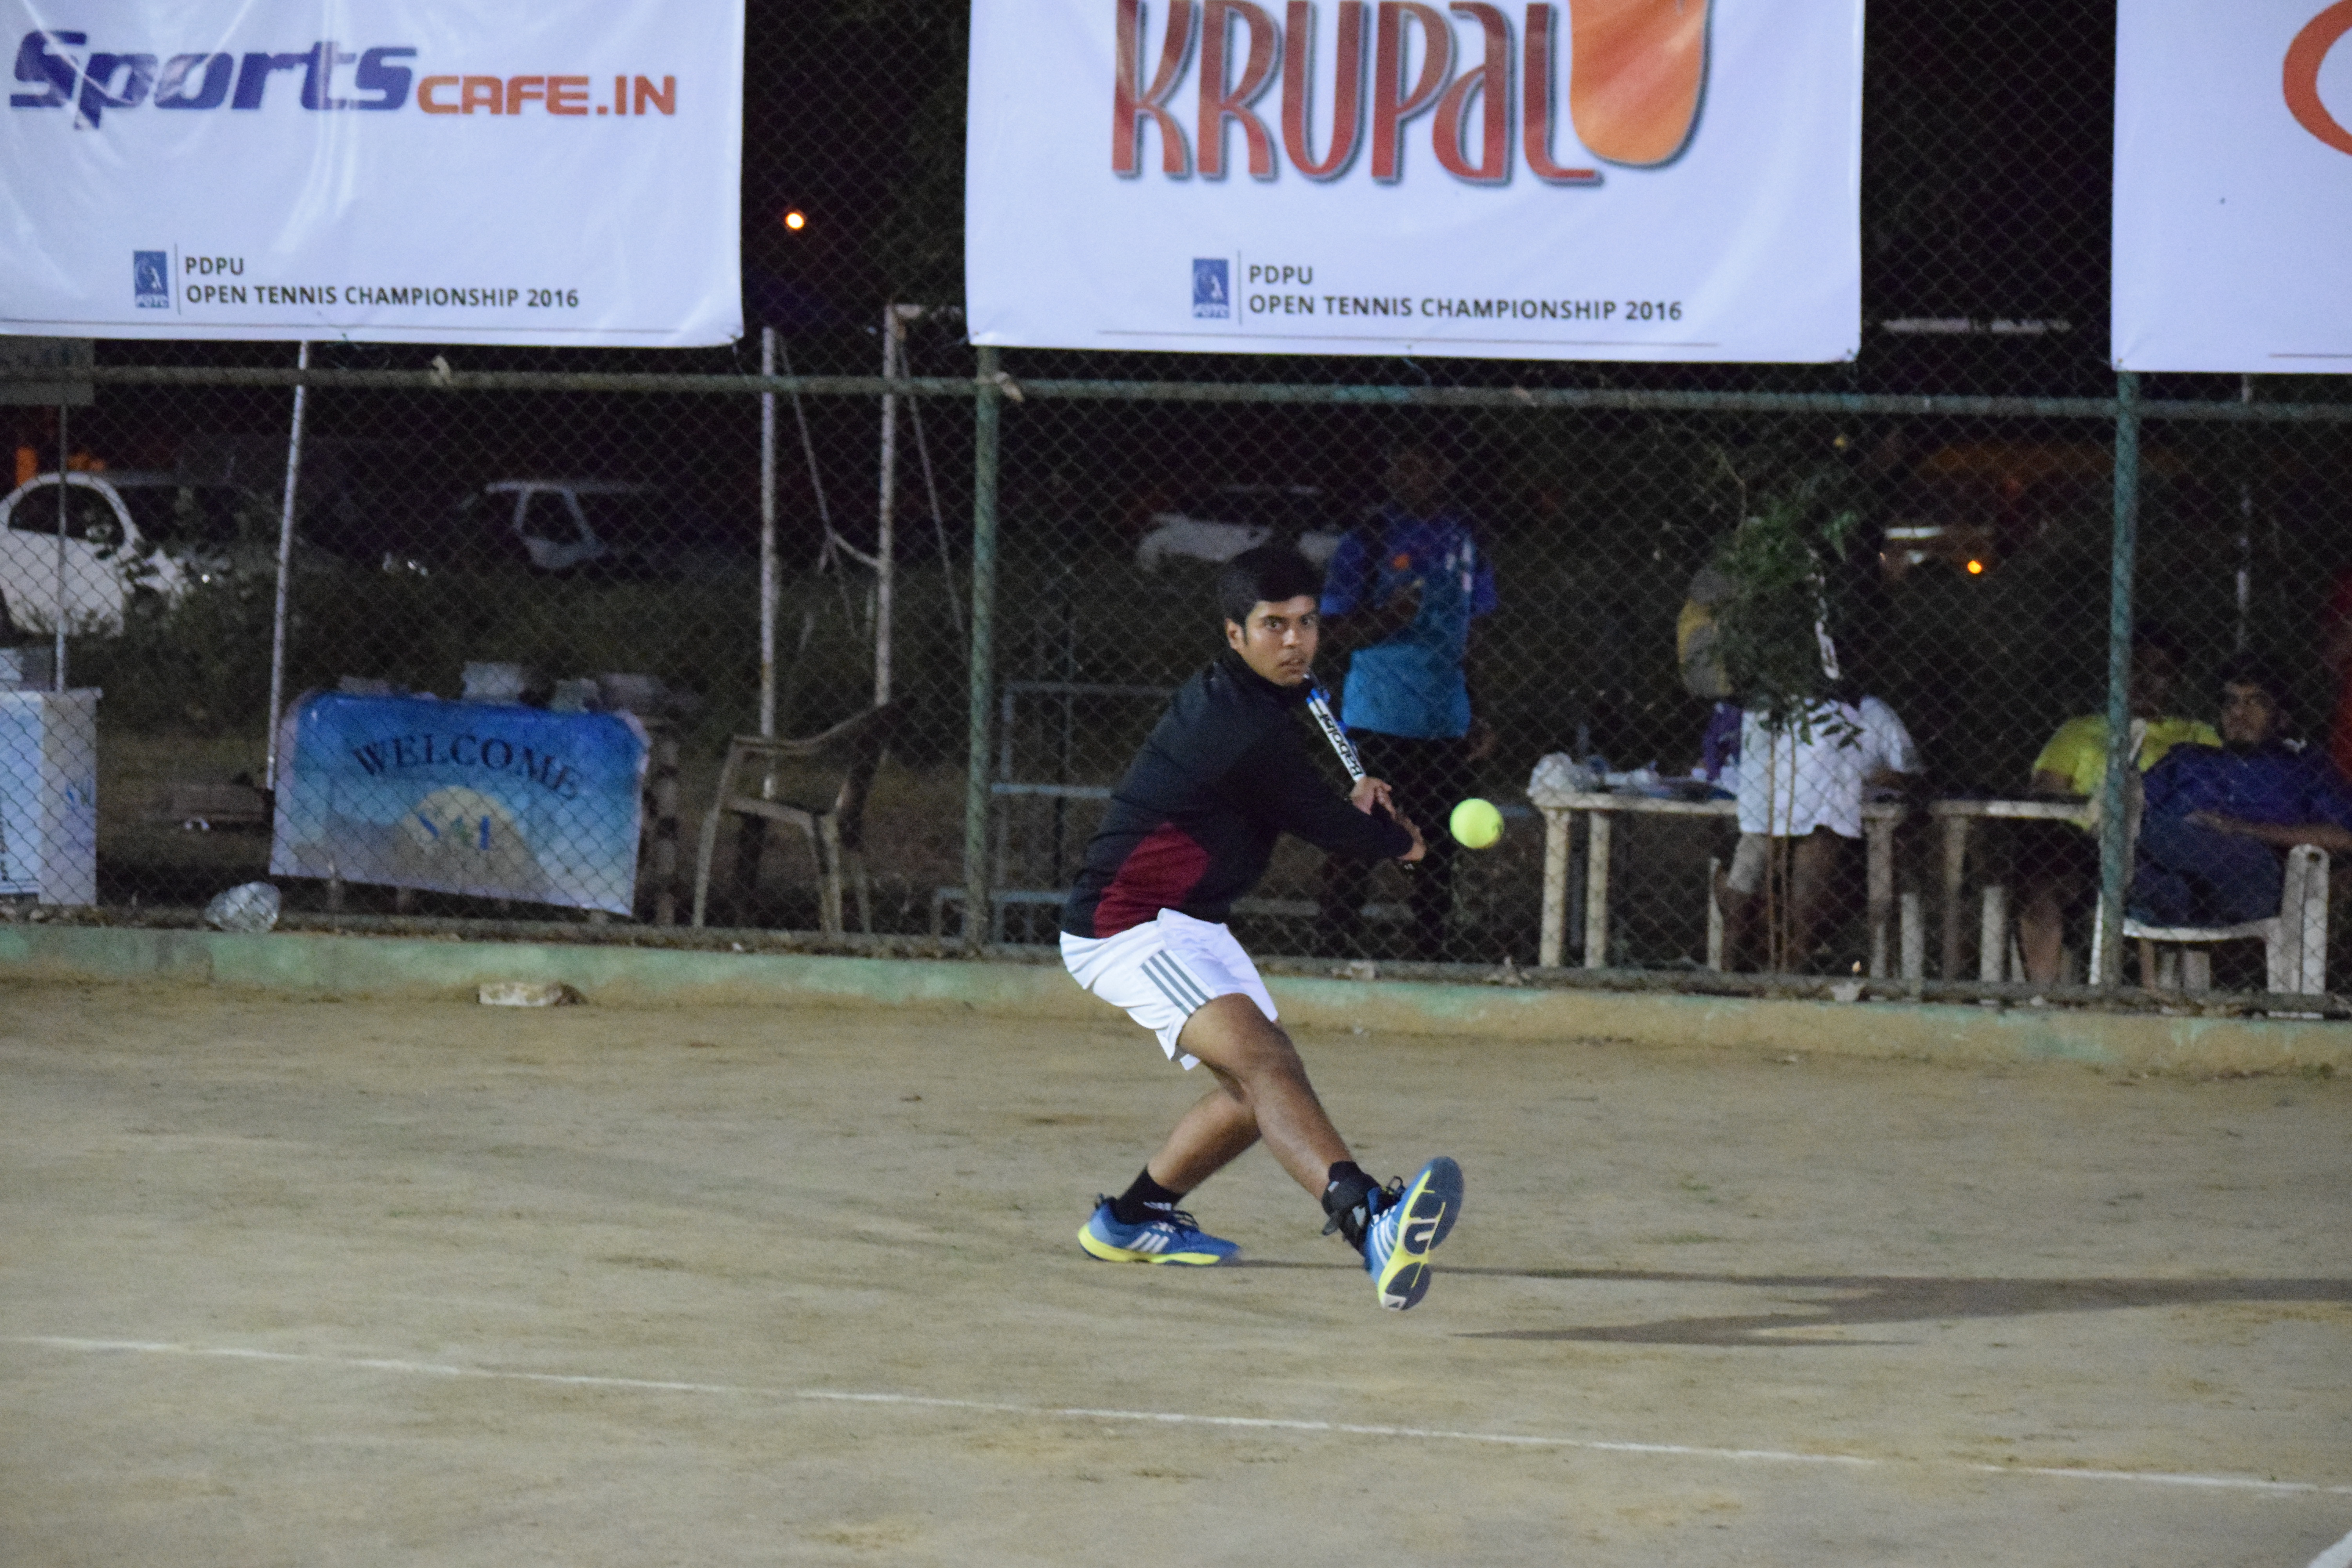 Day 1 Results and Day 2 Fixtures - Live from PDPU Open Tennis Championship 2016